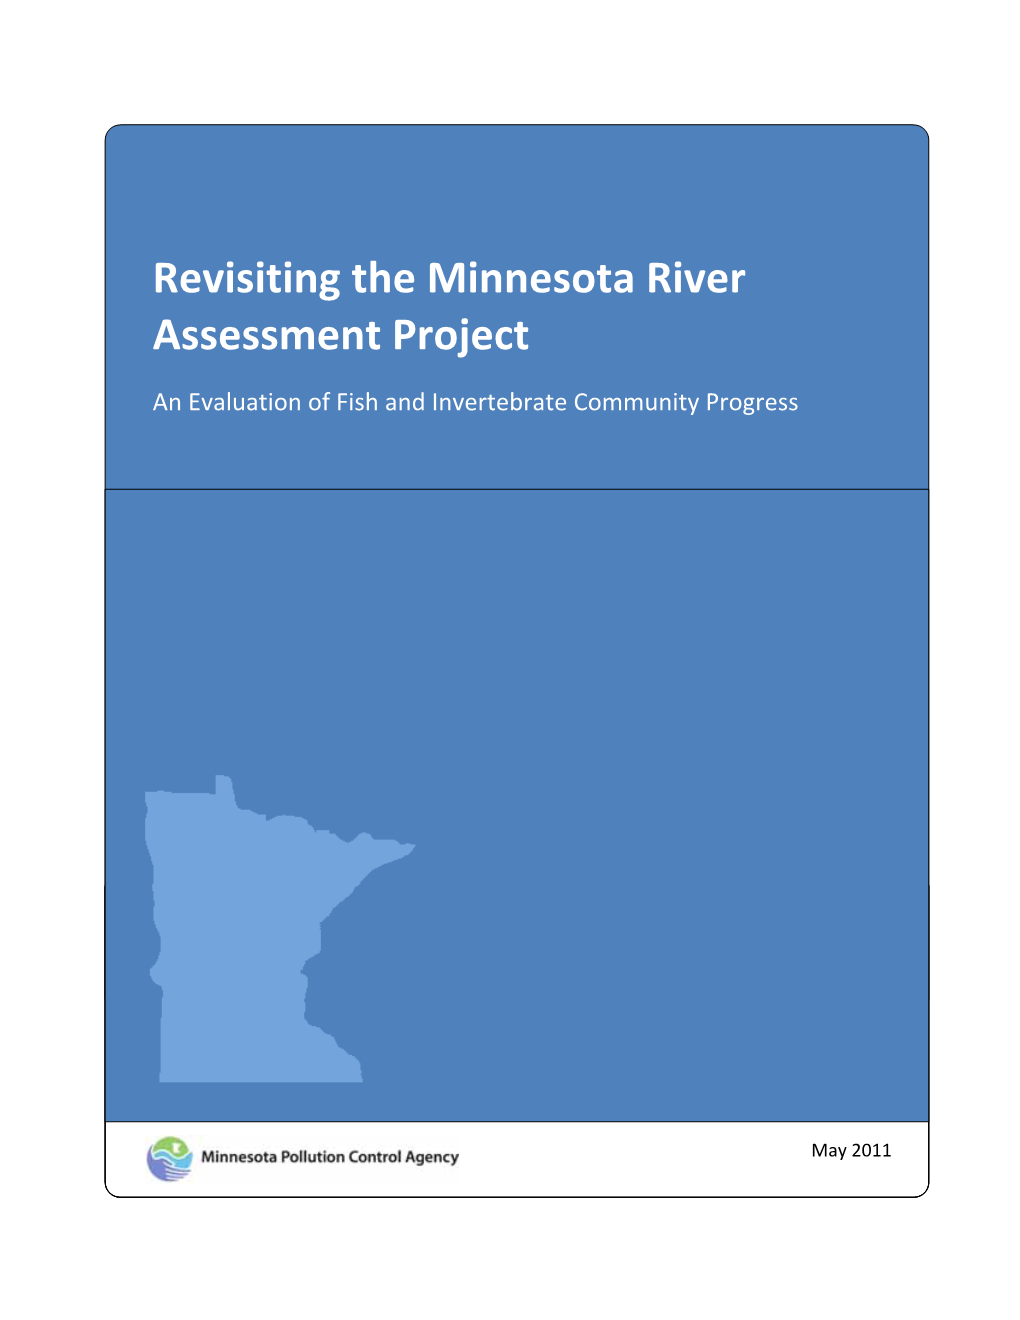 Revisiting the Minnesota River Assessment Project